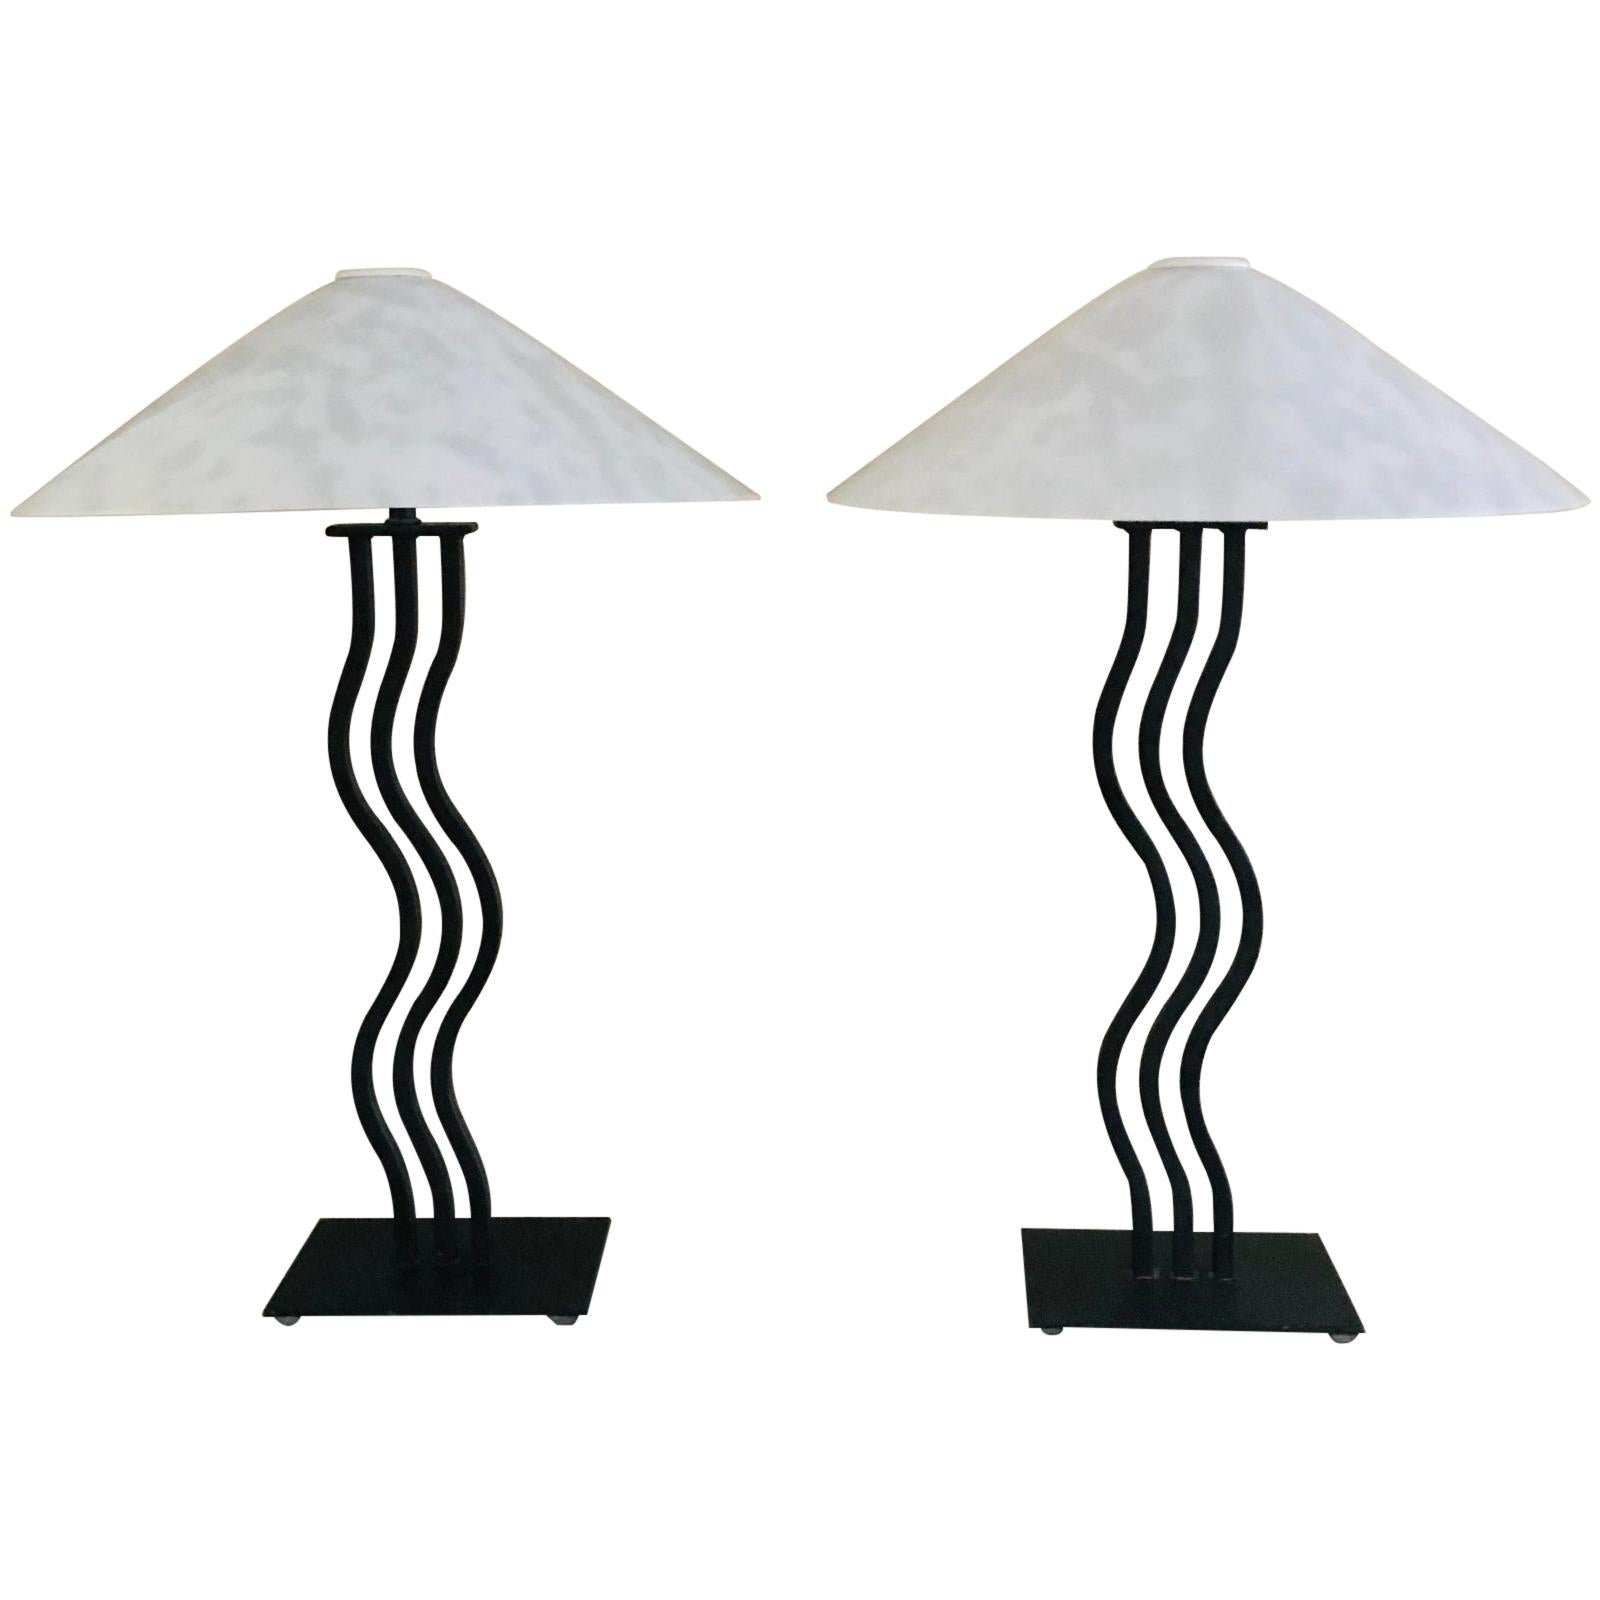 Postmodern Memphis Style Sculptural Curved Wavy Lamps by Alsy, 1980s